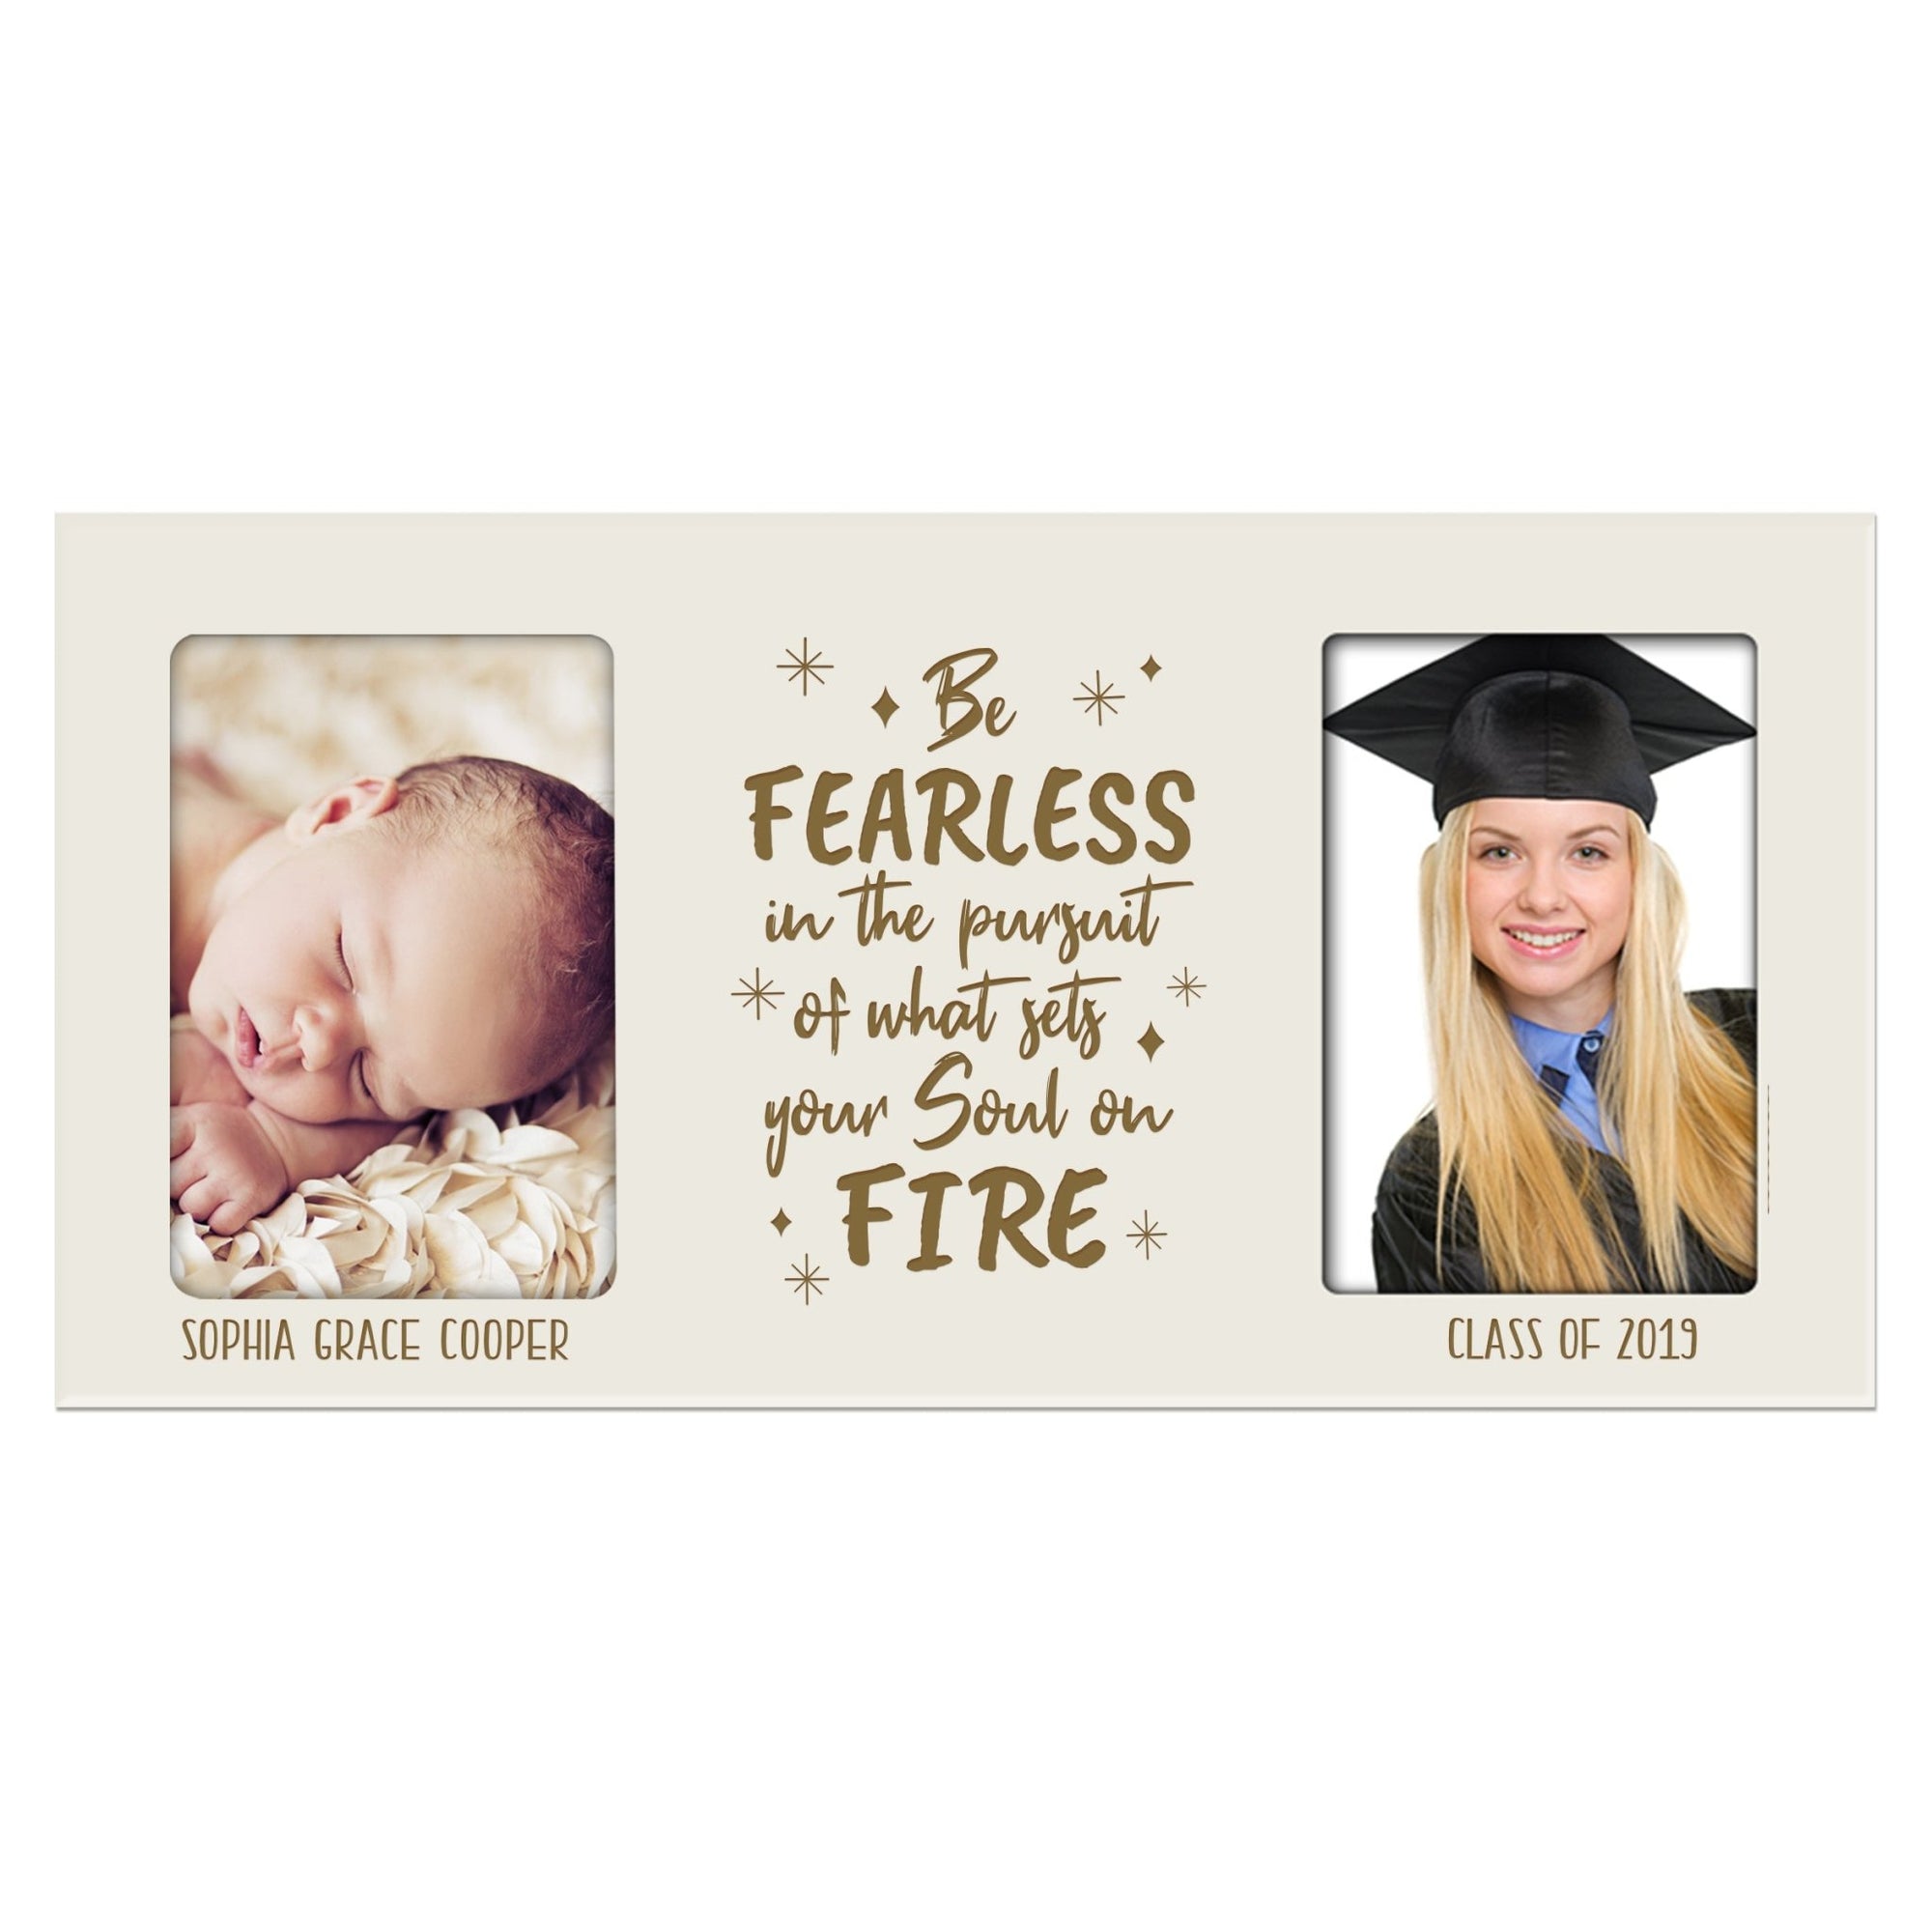 Personalized Graduation Double Photo Frame Gift - Be Fearless - LifeSong Milestones